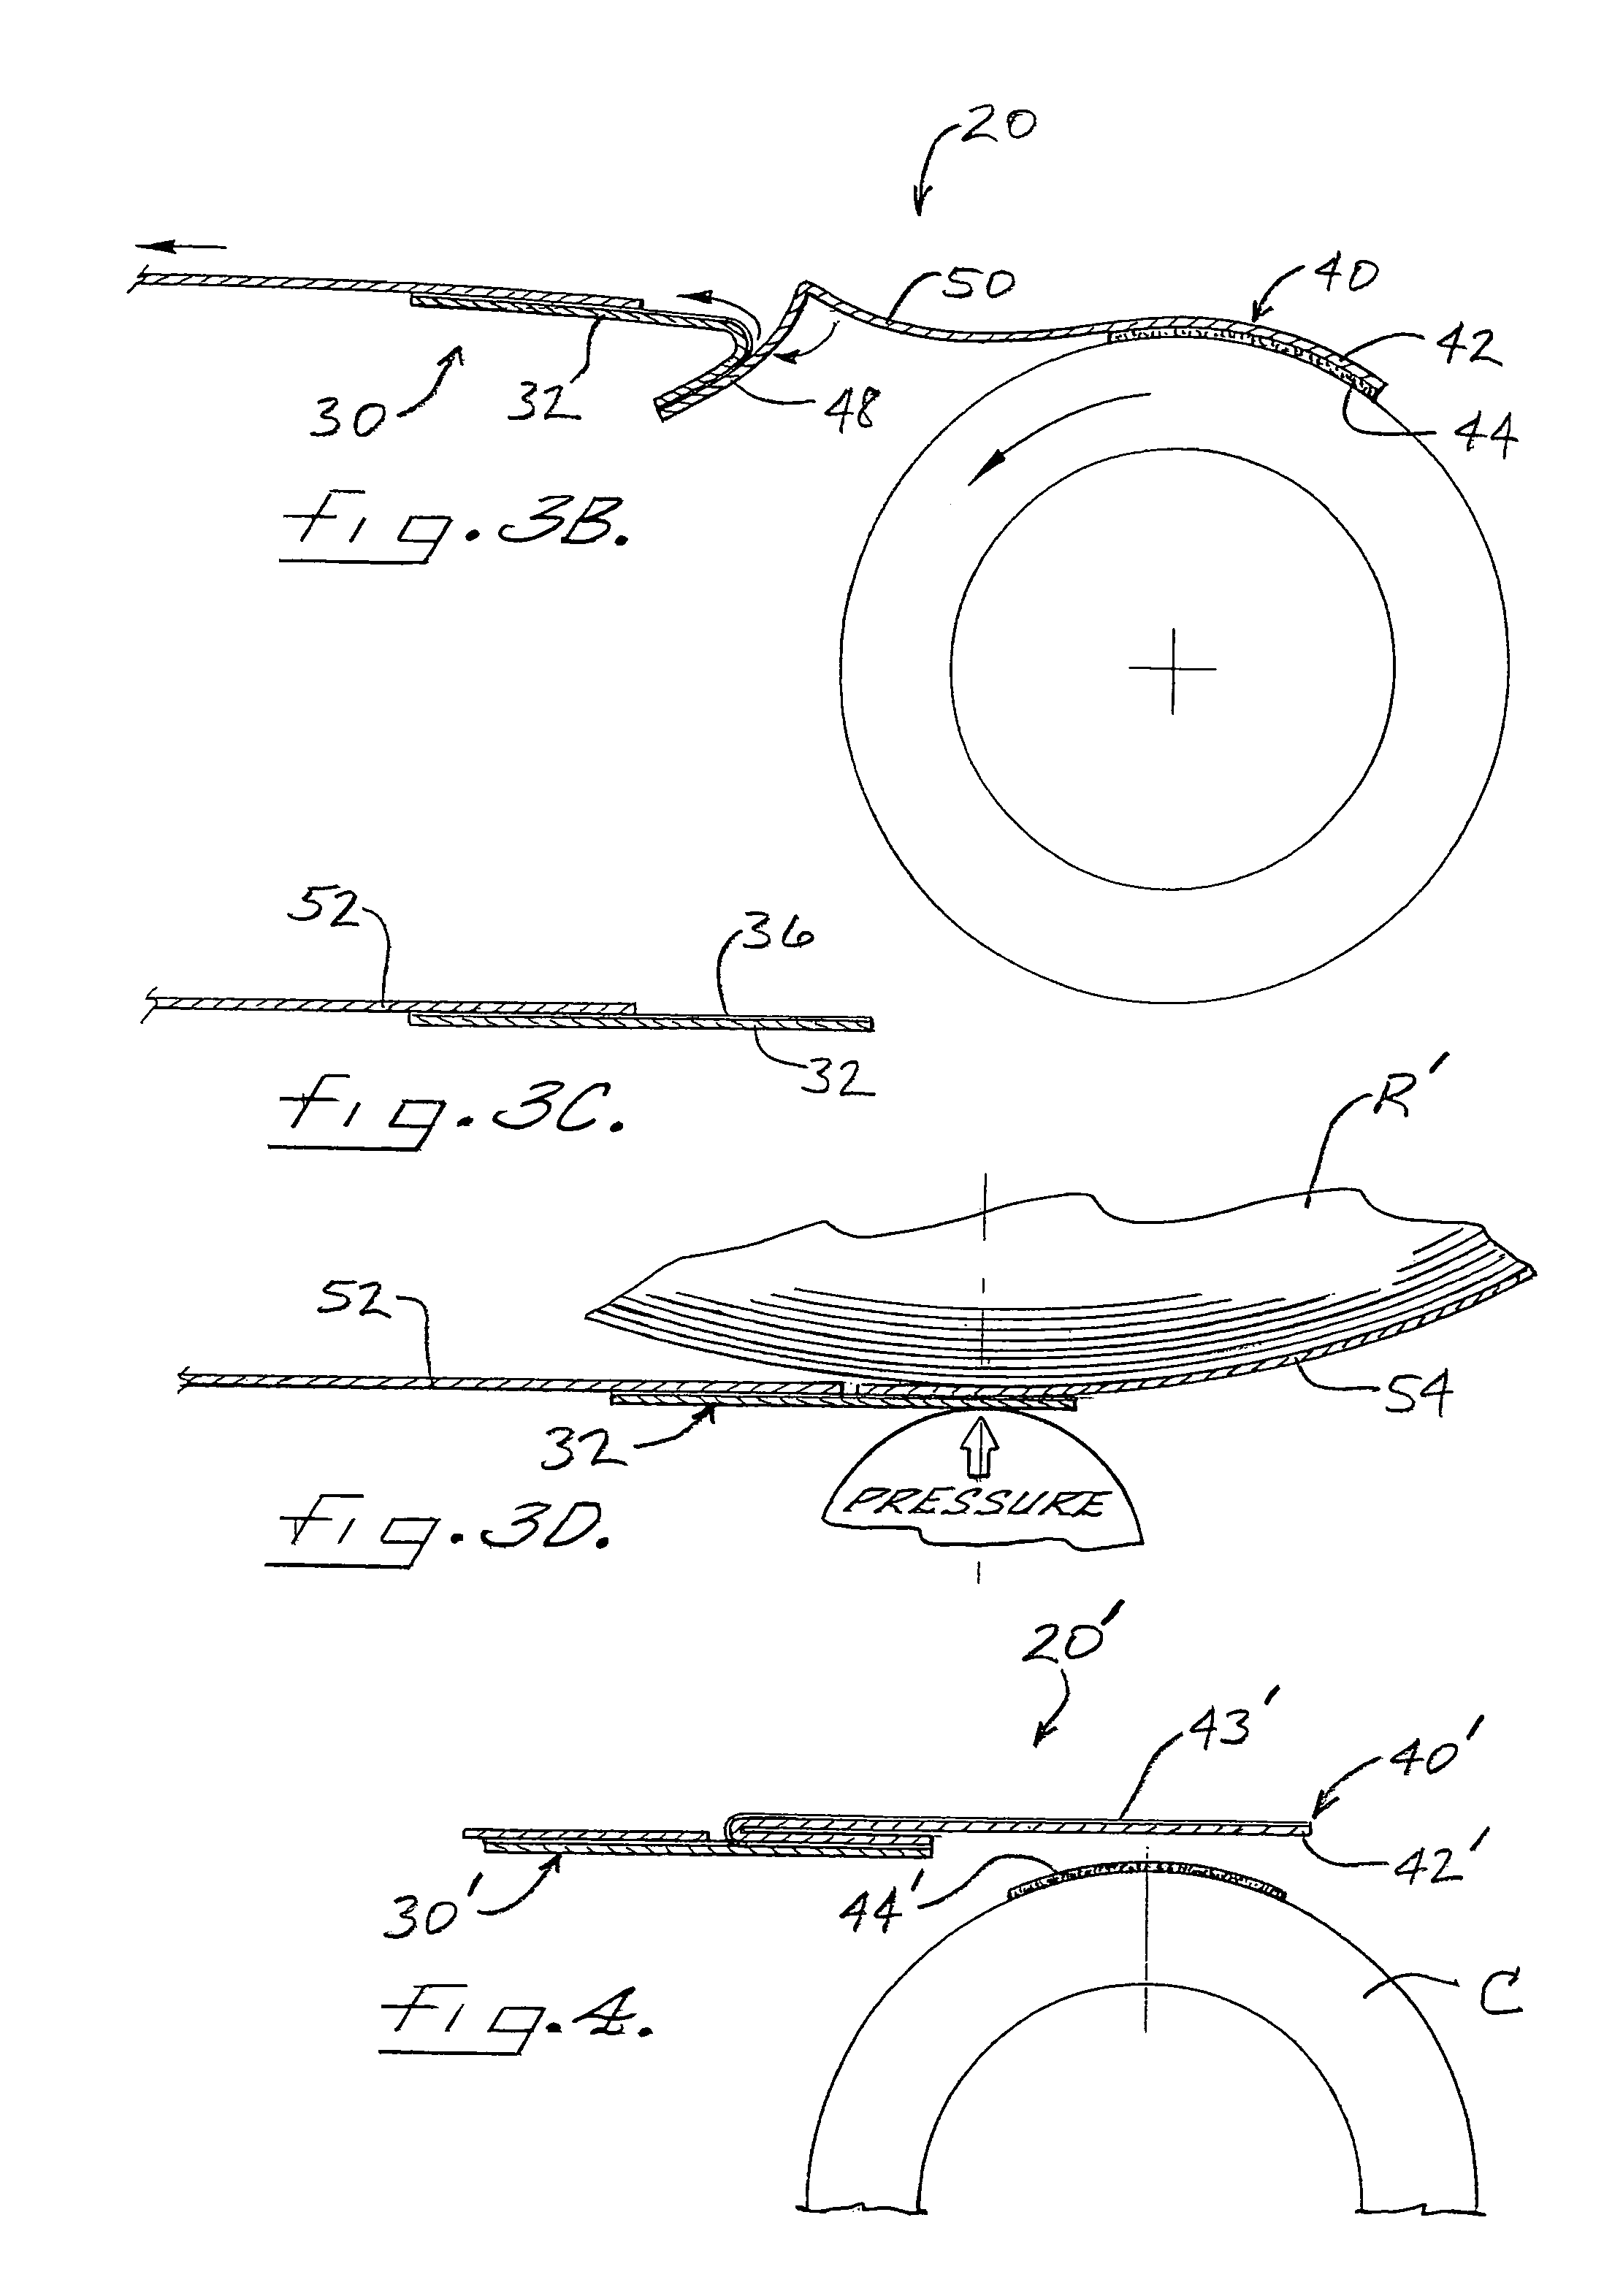 Dual-functioning mechanism for startup during winding of web material and for splicing during unwinding